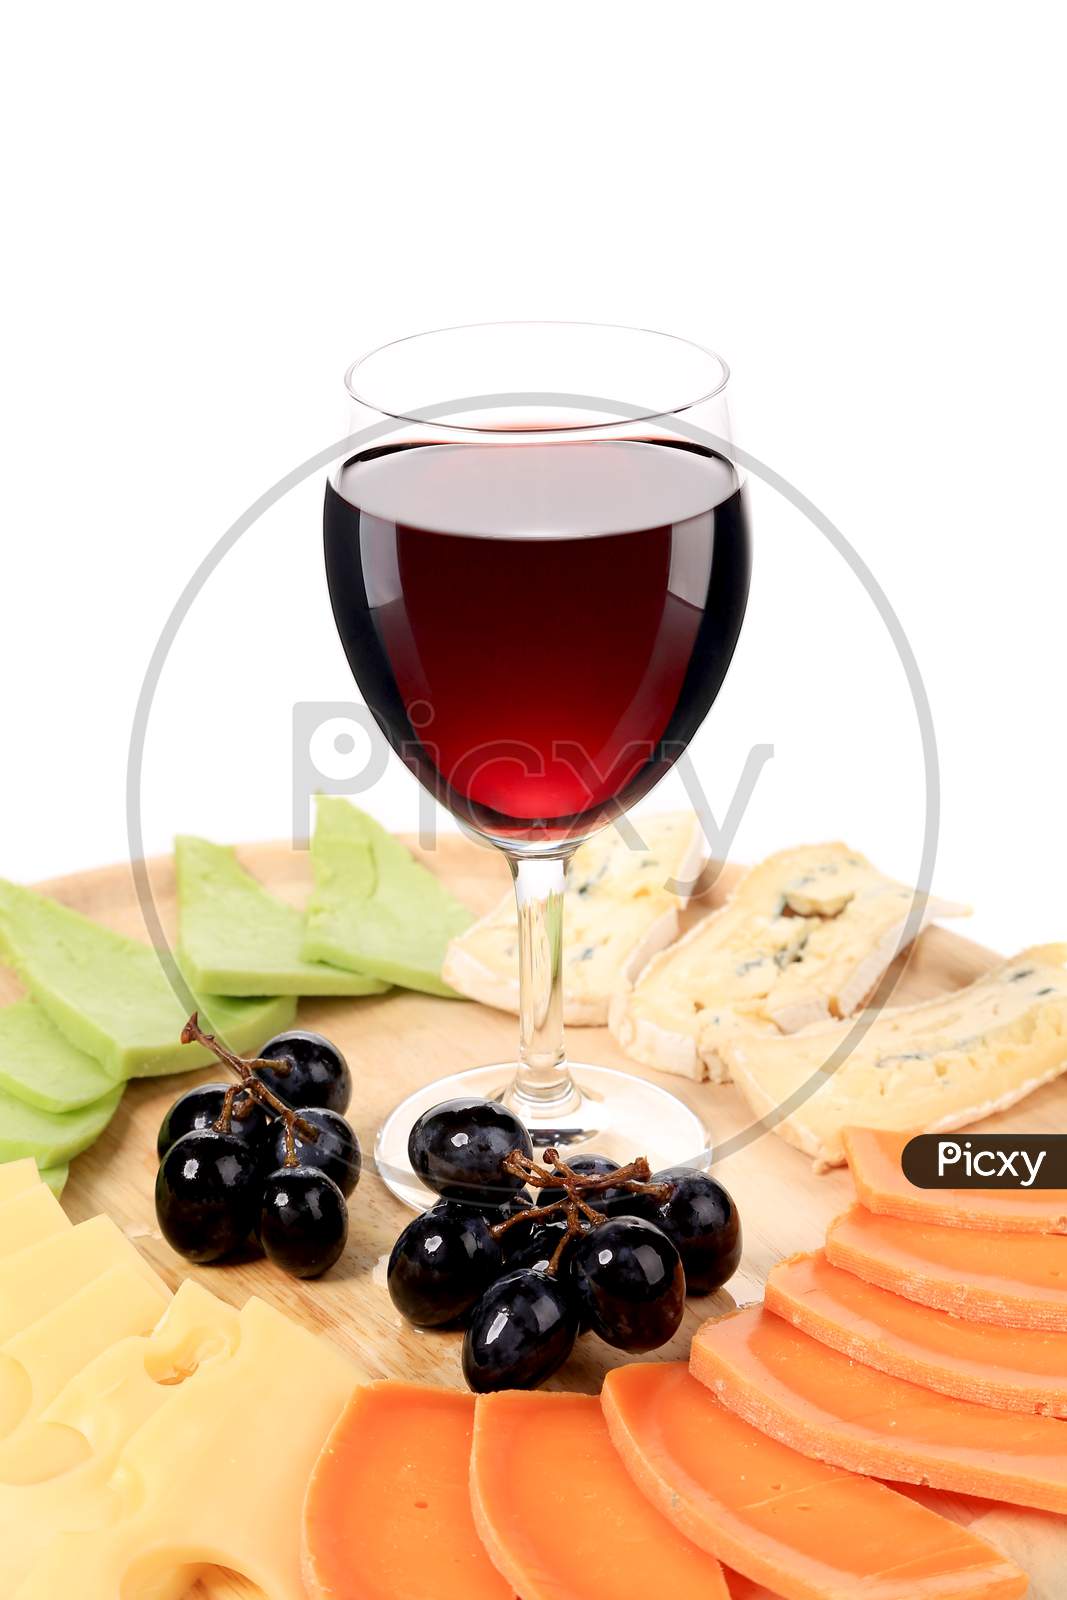 Red Wine And Cheese Composition. Isolated On A White Background.